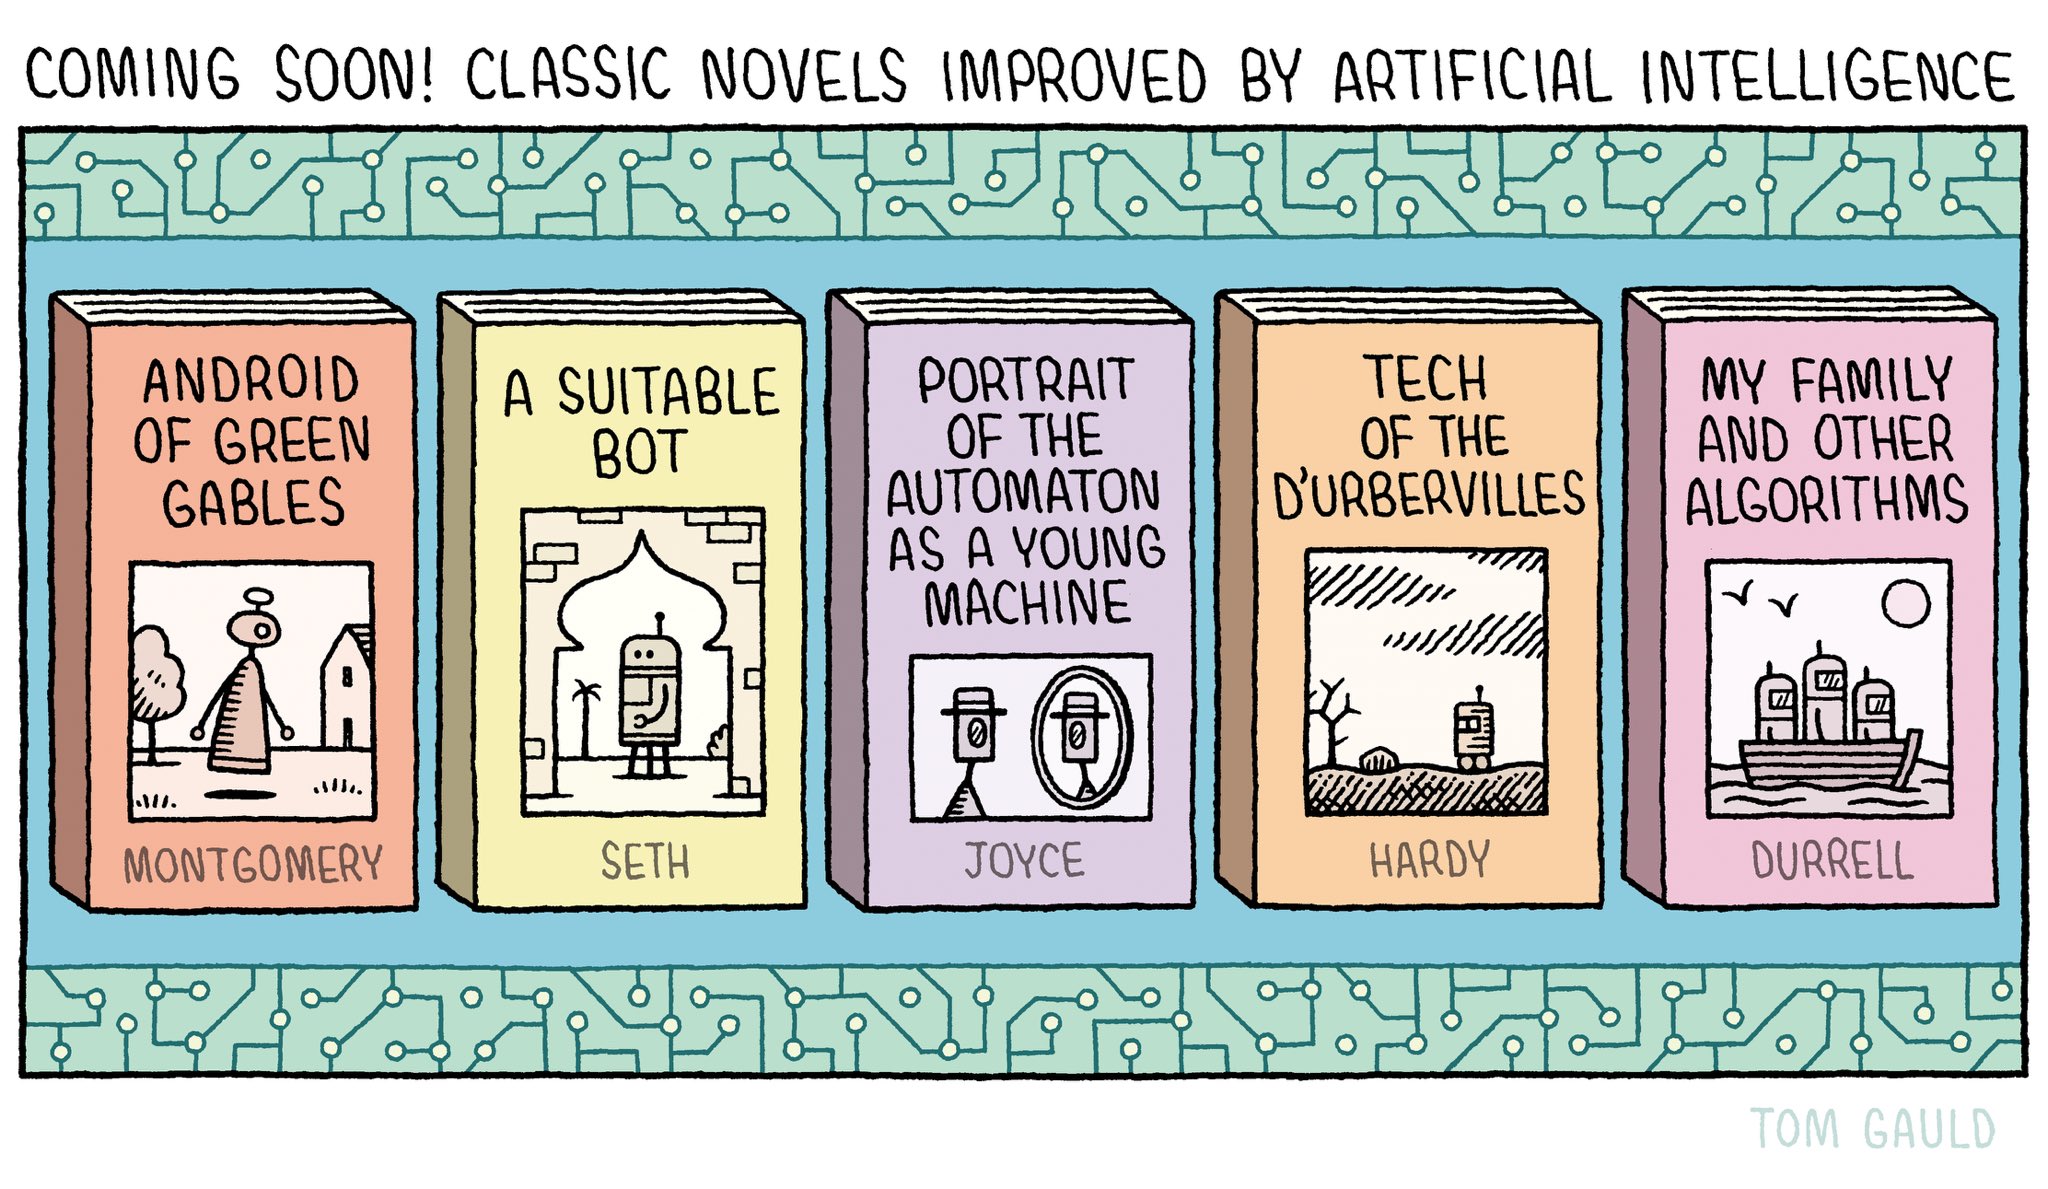 A cartoon.The title: 'Coming soon! Classic novels improved by Artificial Intelligence" The image is of five books. The titles are: "Android of Green Gables" by L M Montgomery "A Suitable Bot" by Vikram Seth "Portrait of the Automaton as a Young Machine" by James Joyce "Tech of the D'Urbervilles" by Thoms Hardy "My Family and other Algorithms" by Gerald Durrell